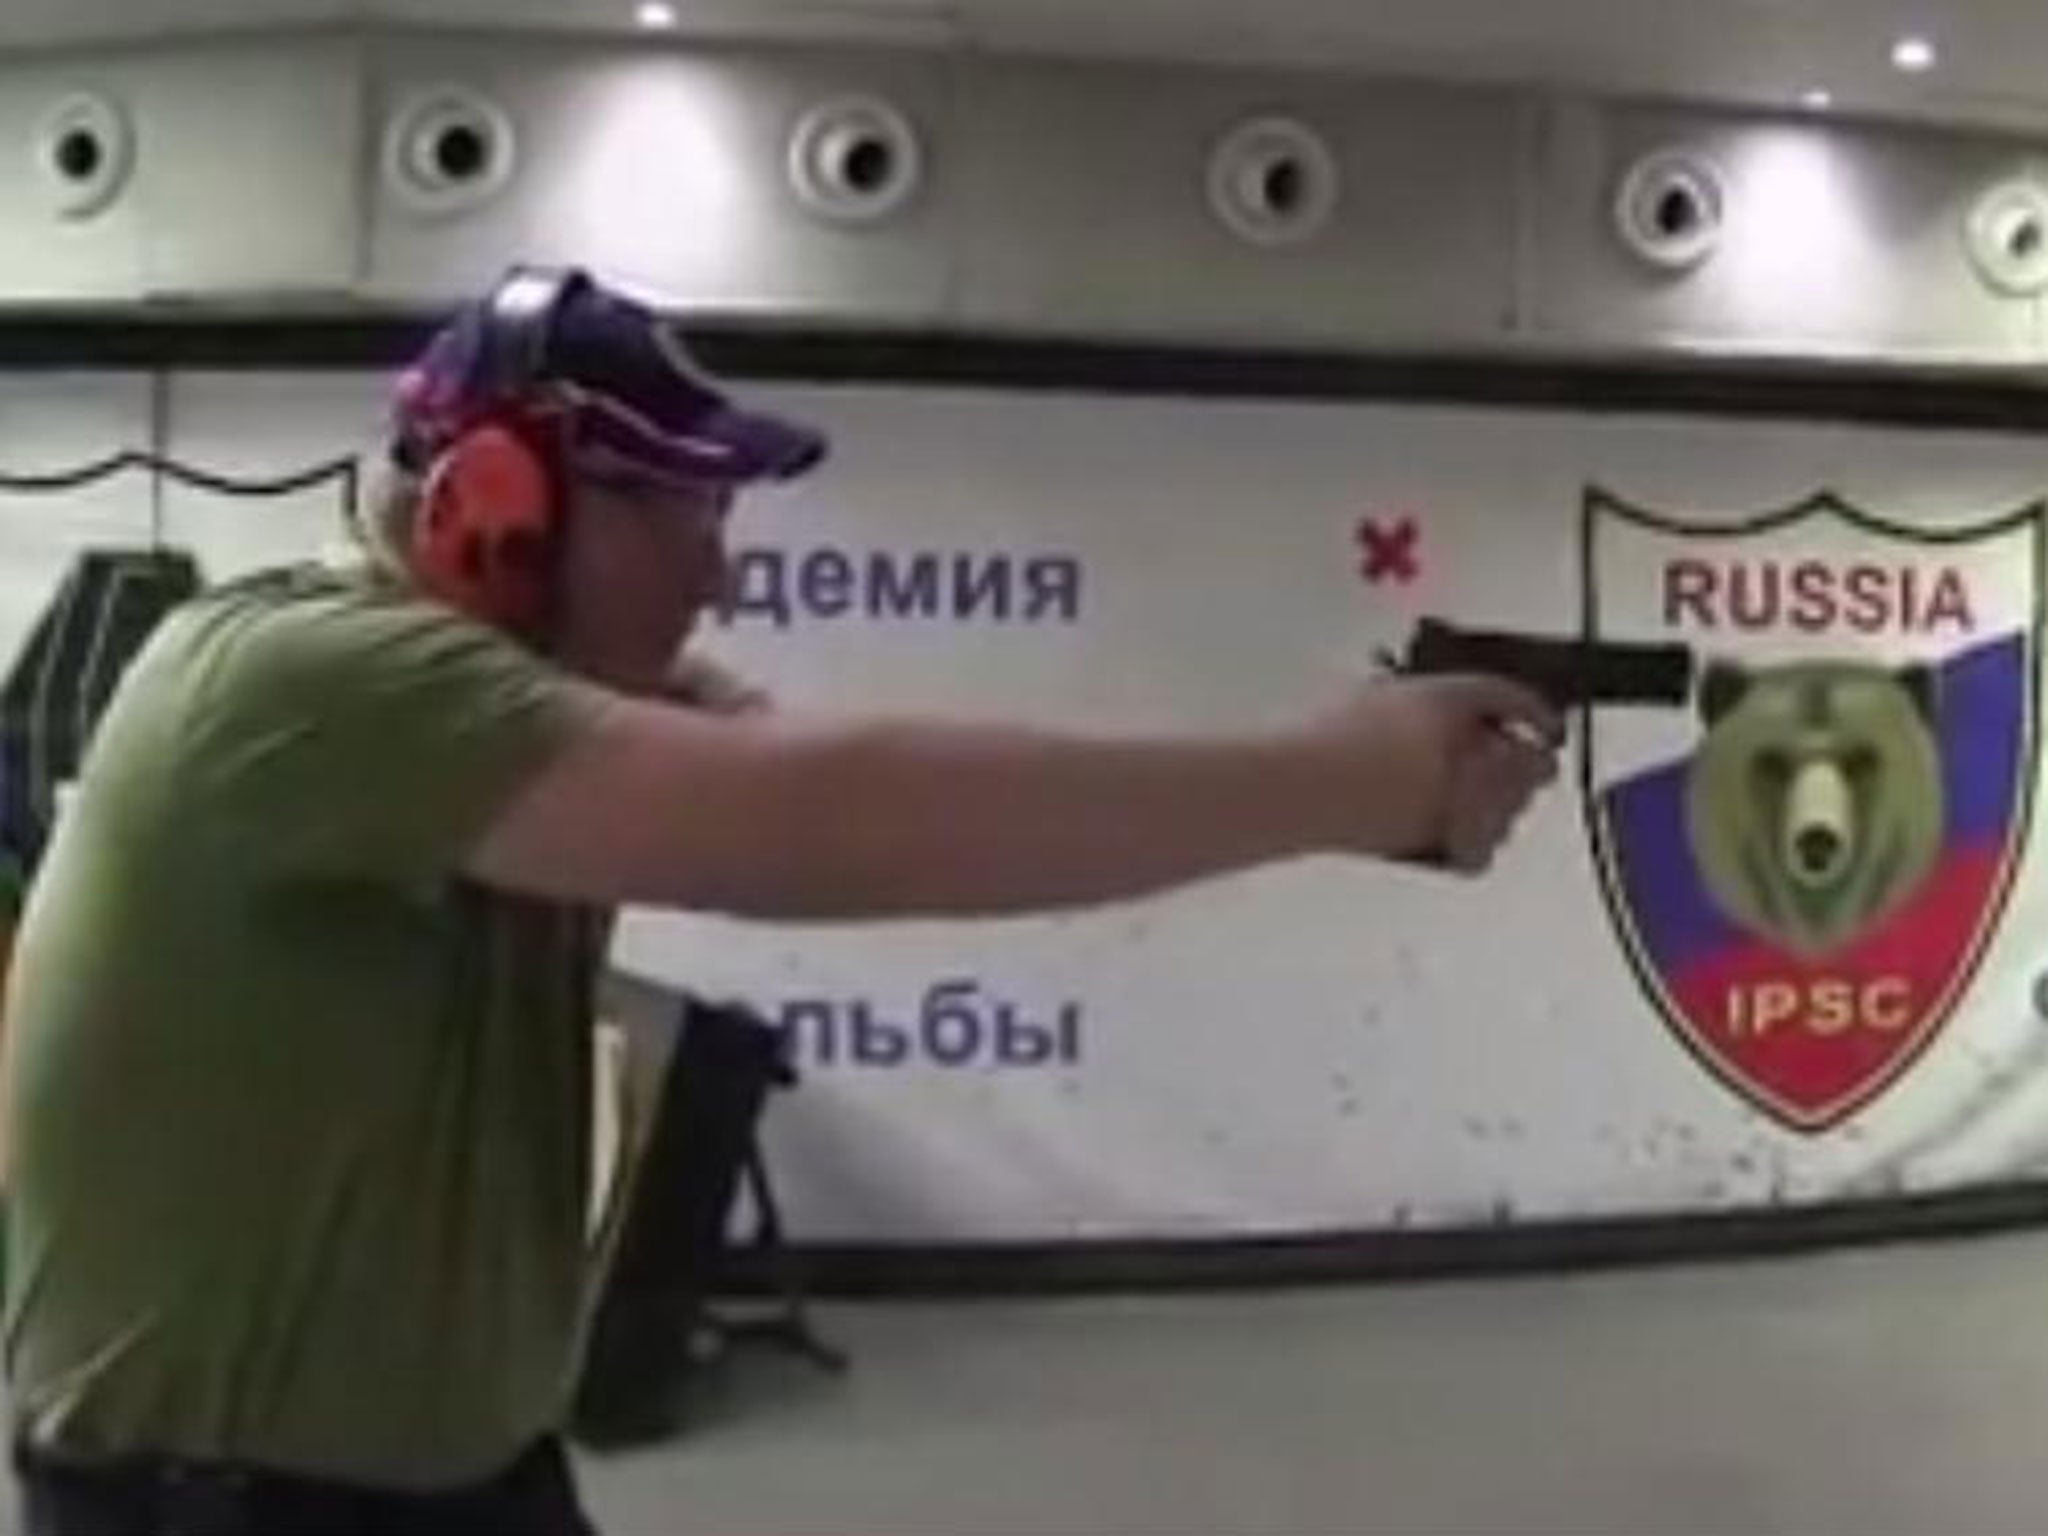 Dmitry Rogozin, the Russian Deputy Prime Minister, posted footage of himself at a shooting range online in December